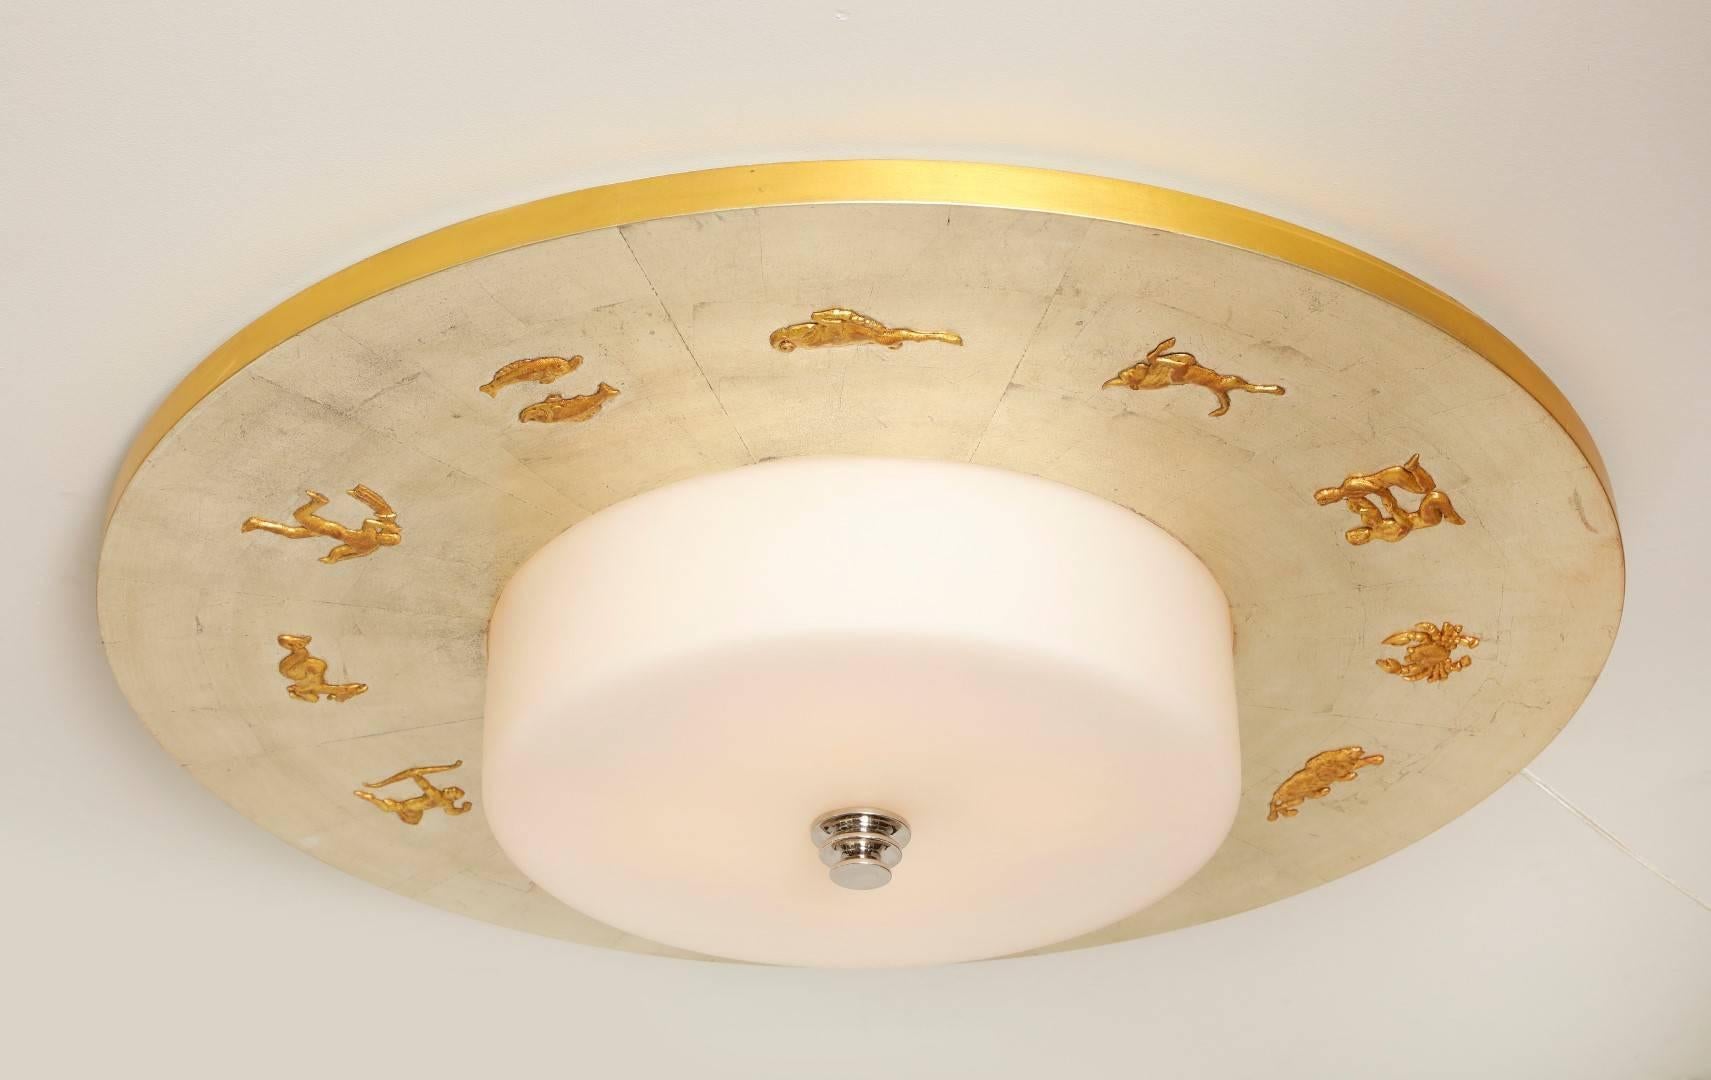 A Swedish Grace period inspired round ceiling light with disk shaped wooden frame having a white gold leaf finish, the underside encircled by low relief signs of the zodiac, the center with 16